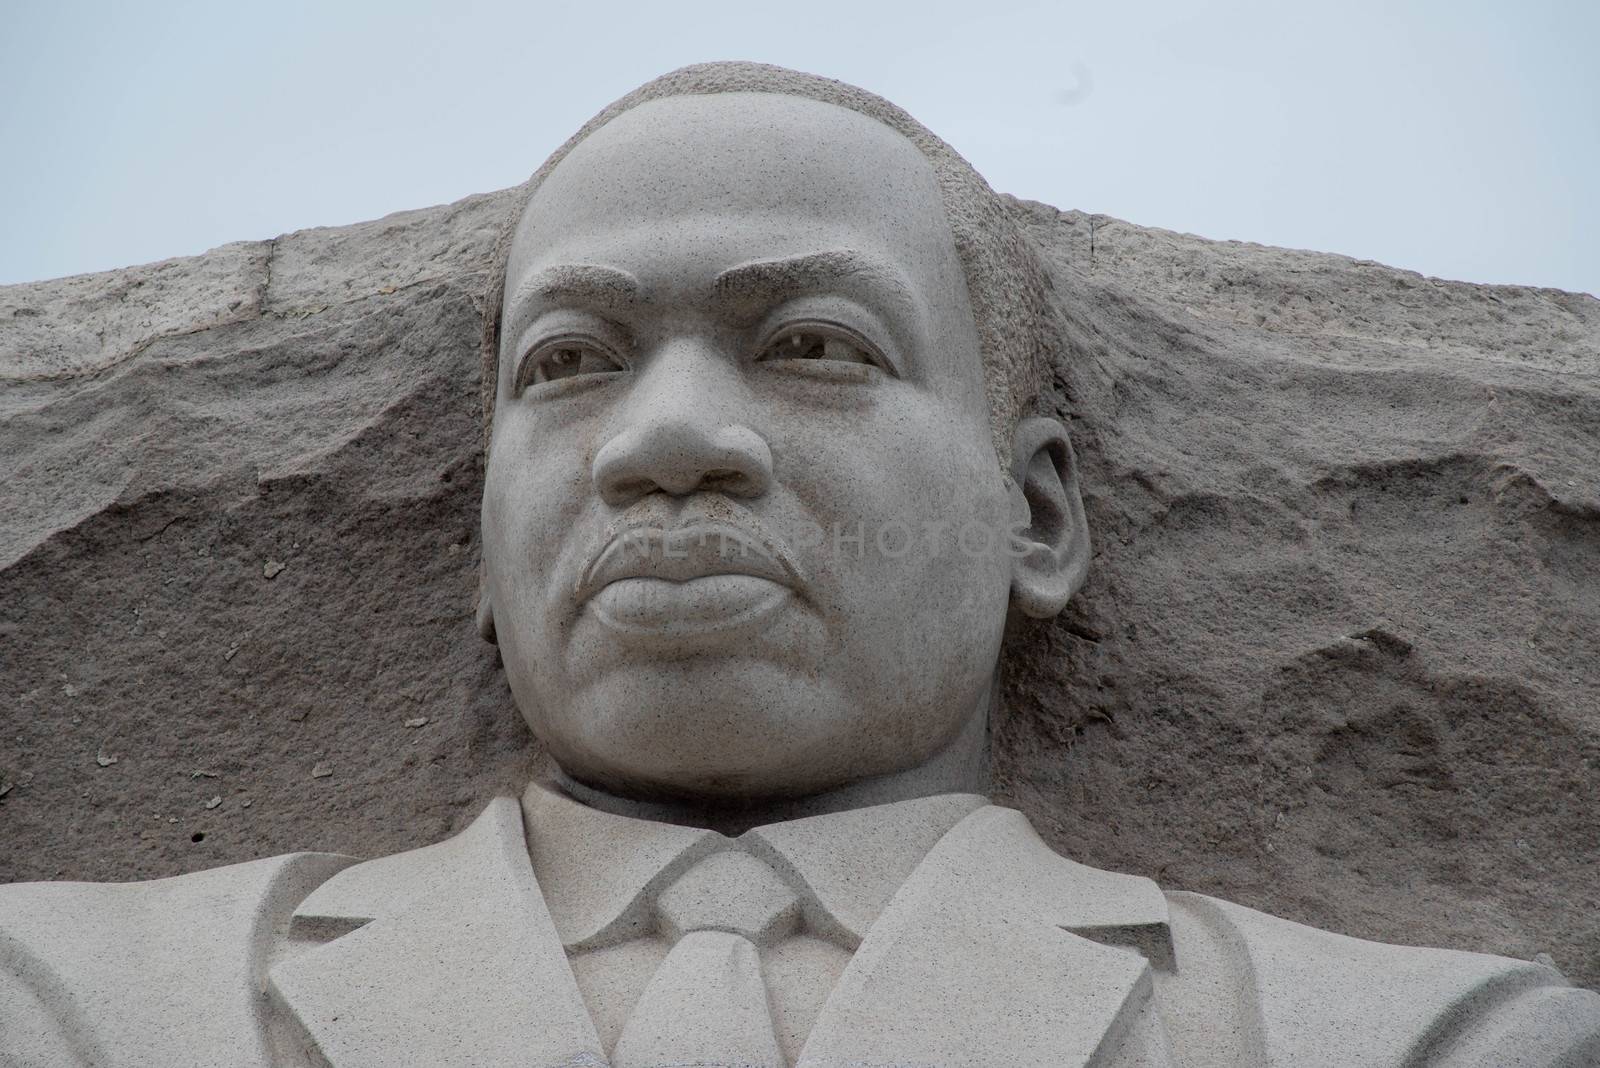 Dr. Martin Luther King Jr. memorial face close up. by marysalen